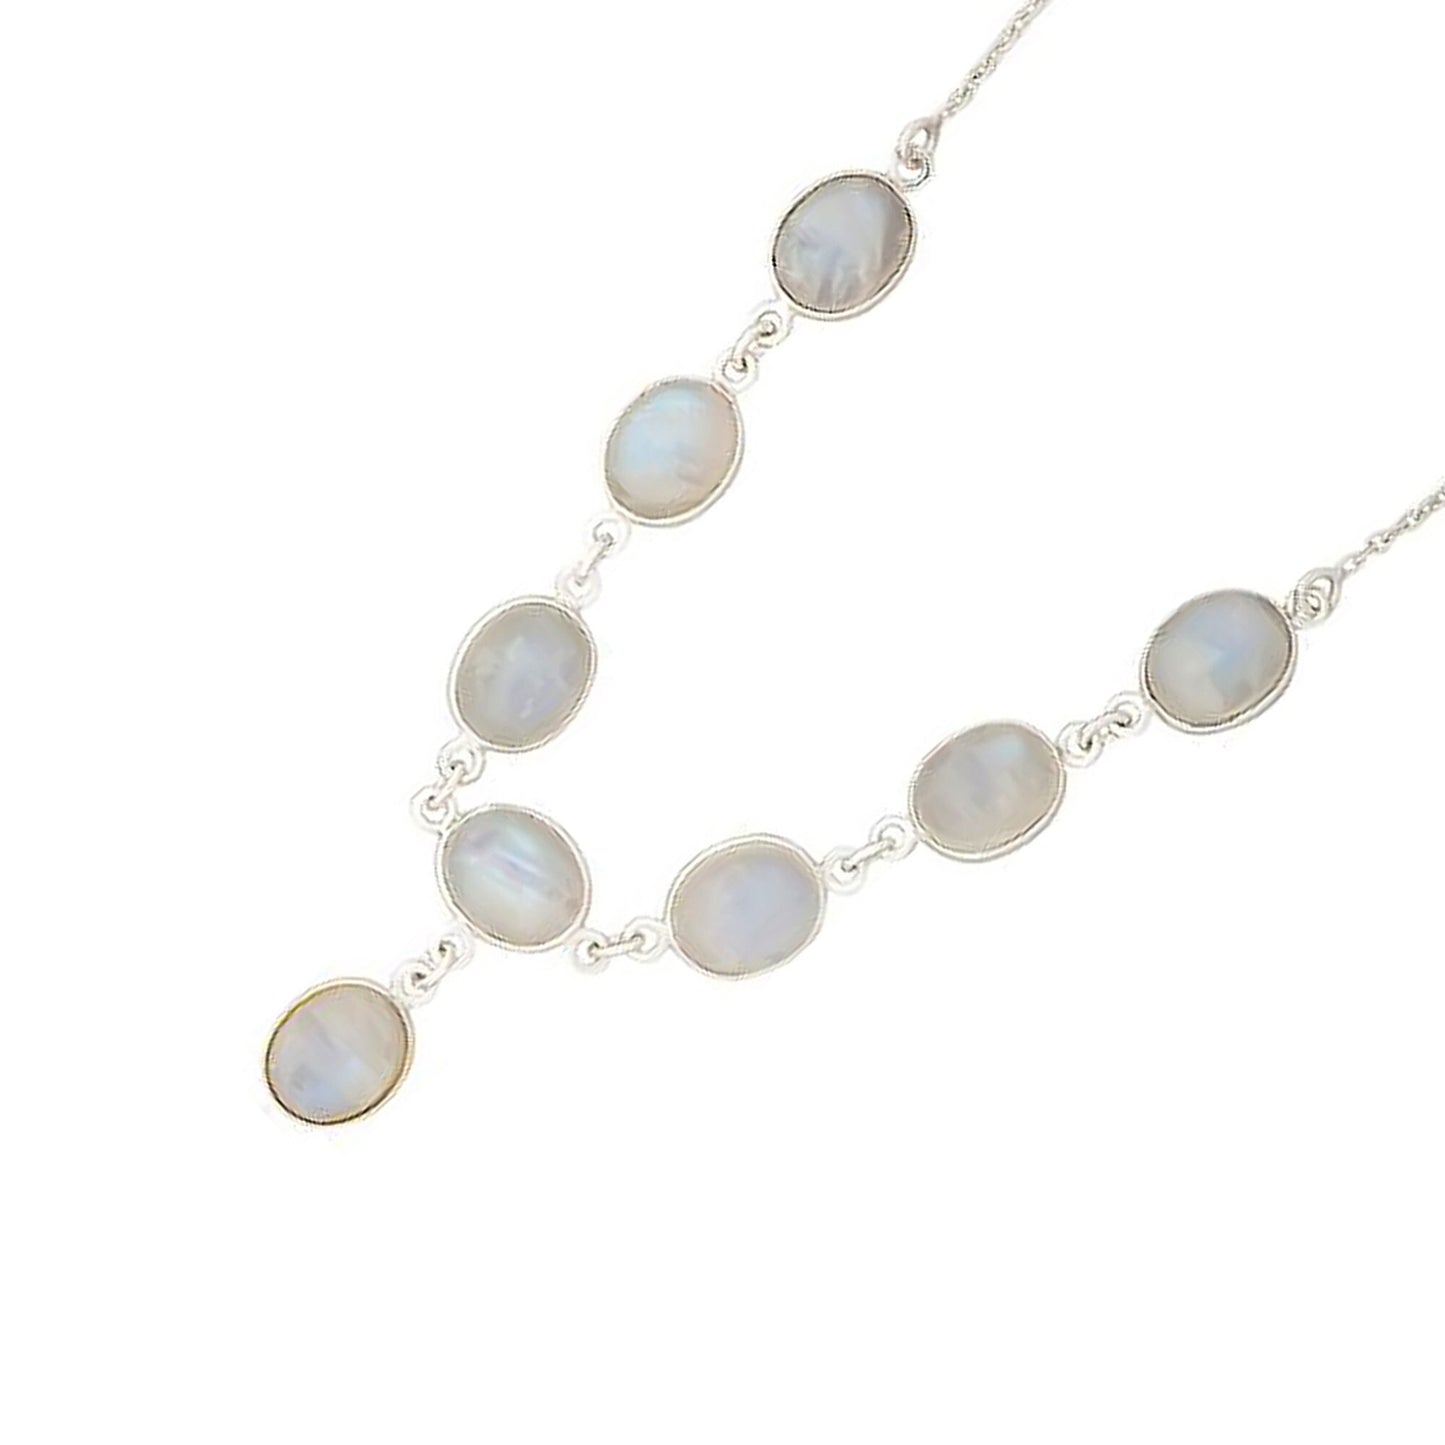 Natural Rainbow Moonstone Gemstone Necklace 925 Sterling Silver Necklace For Women, Necklace 18", Fine Jewelry, Gift For Her